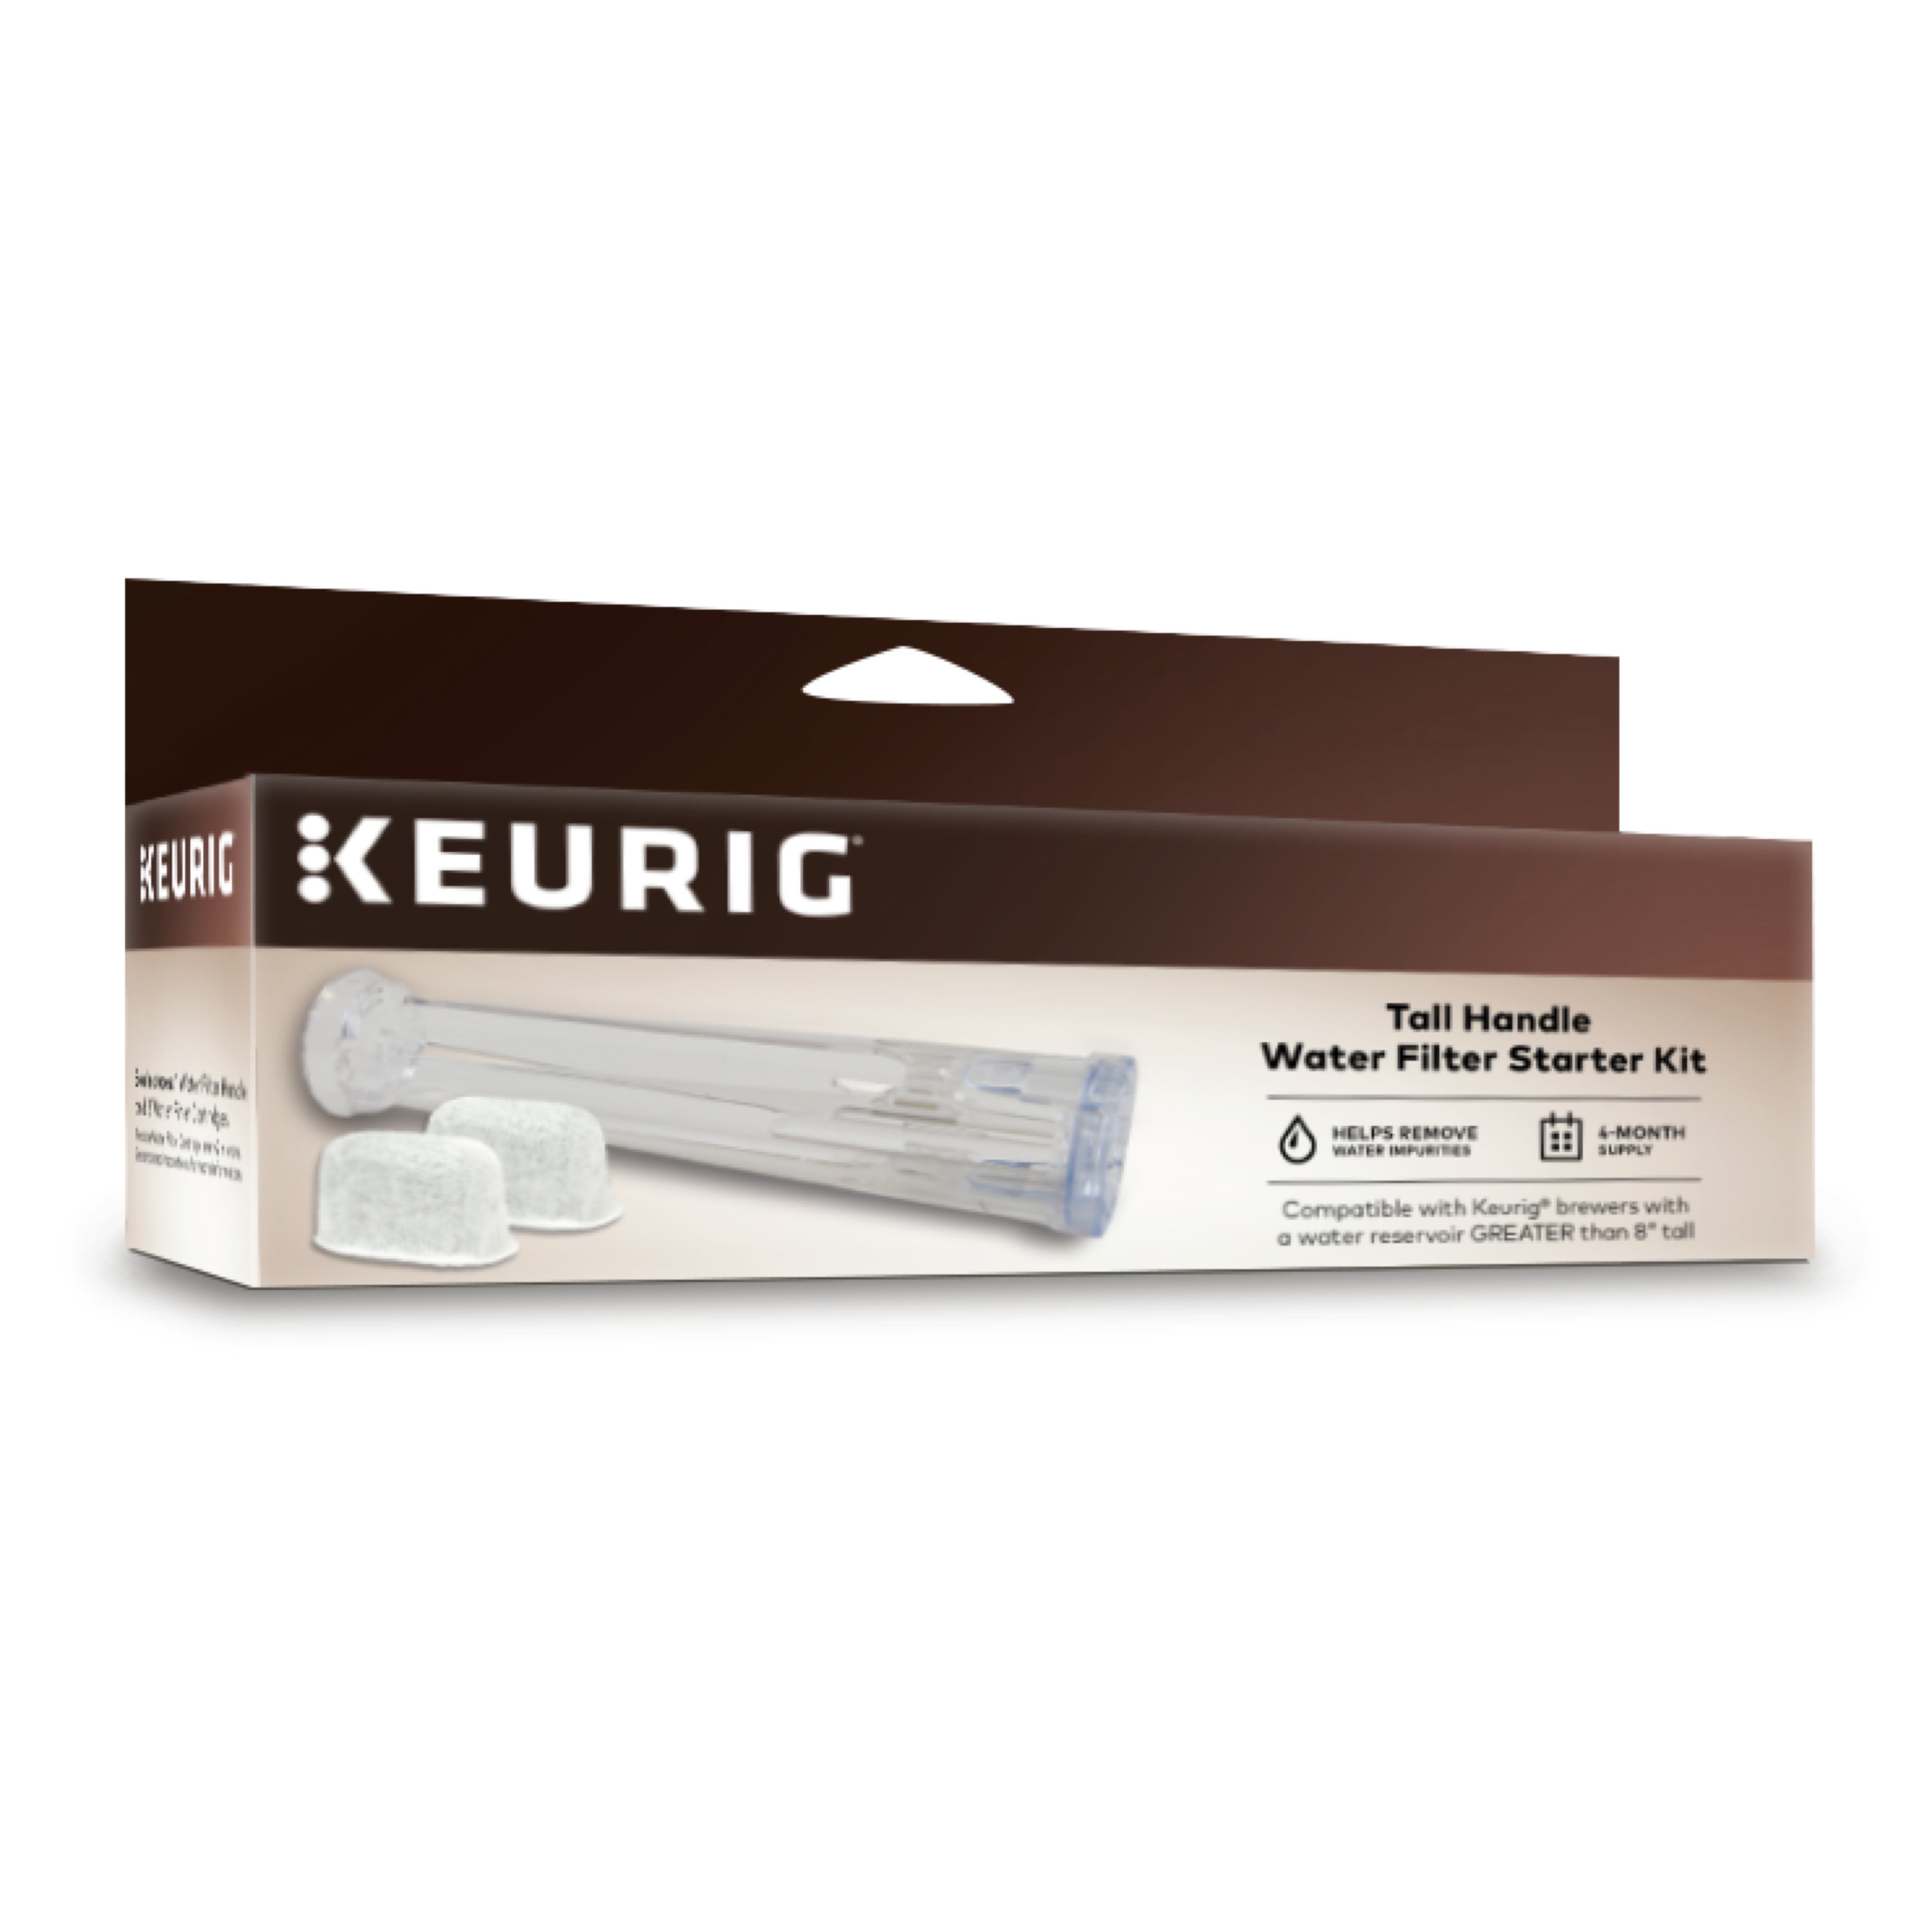 Keurig Tall Handle Filter and 2 Water Filter Cartridges